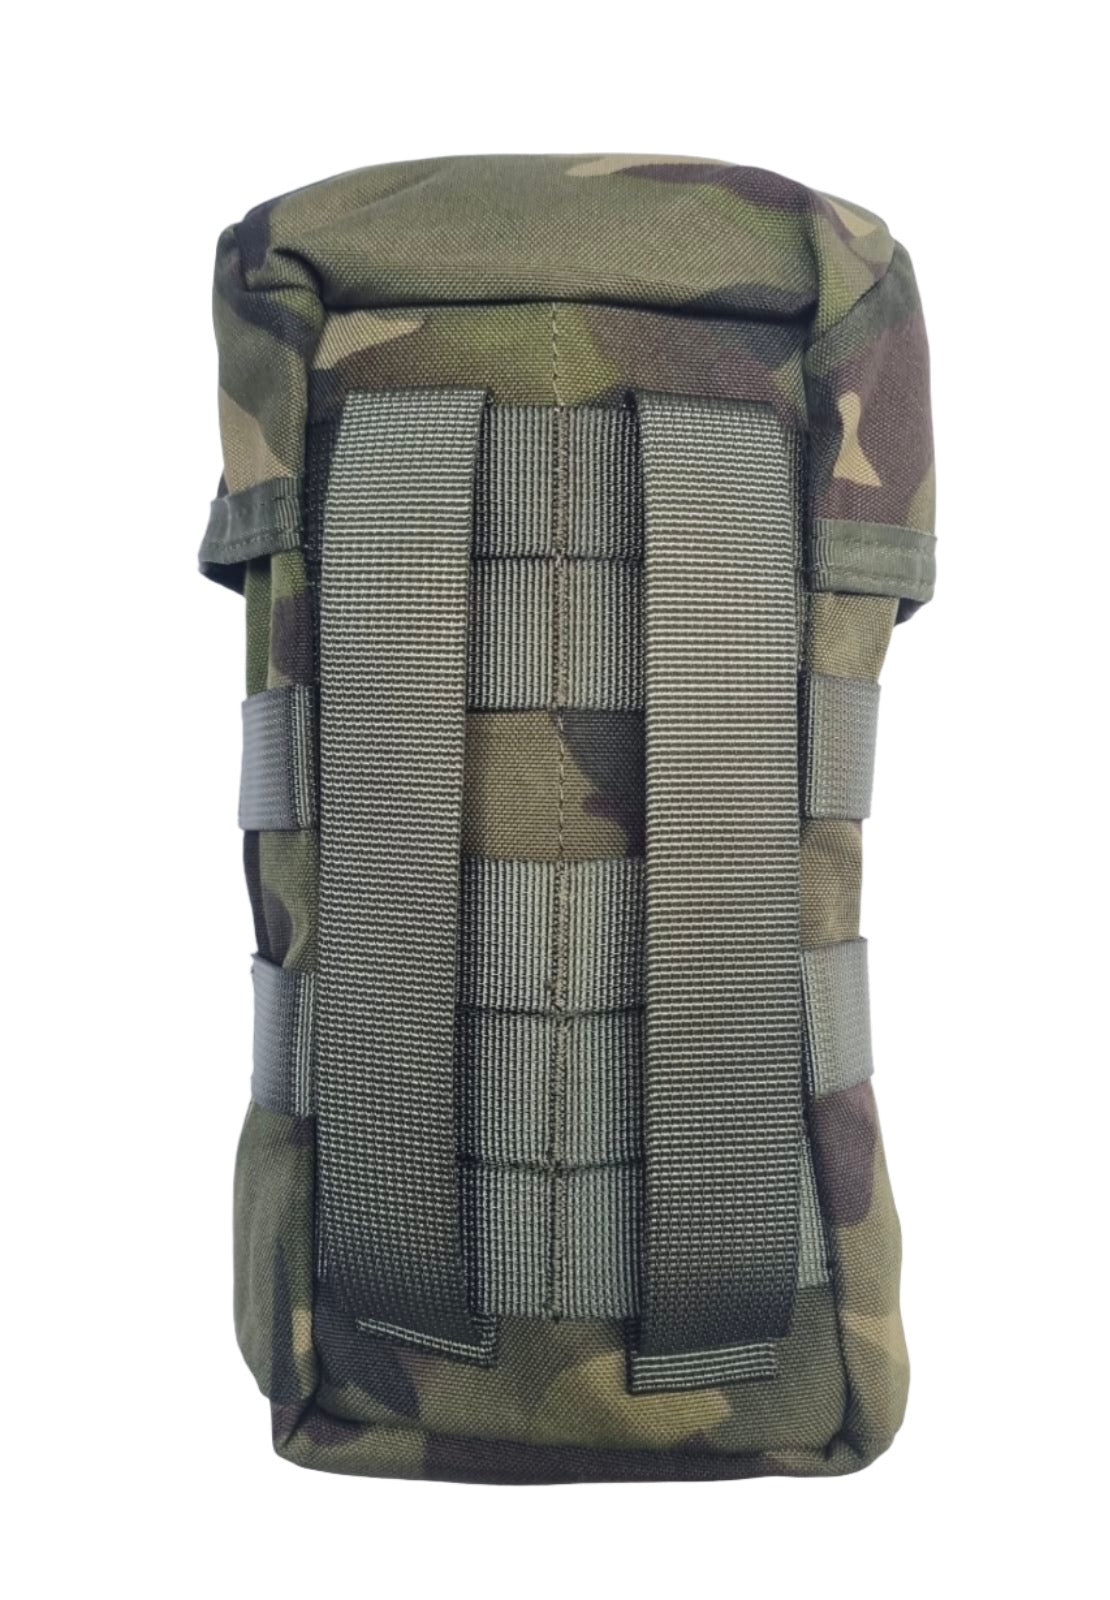 Shadow Strategic Camouflage Canteen Pouch Color Multicam Green.